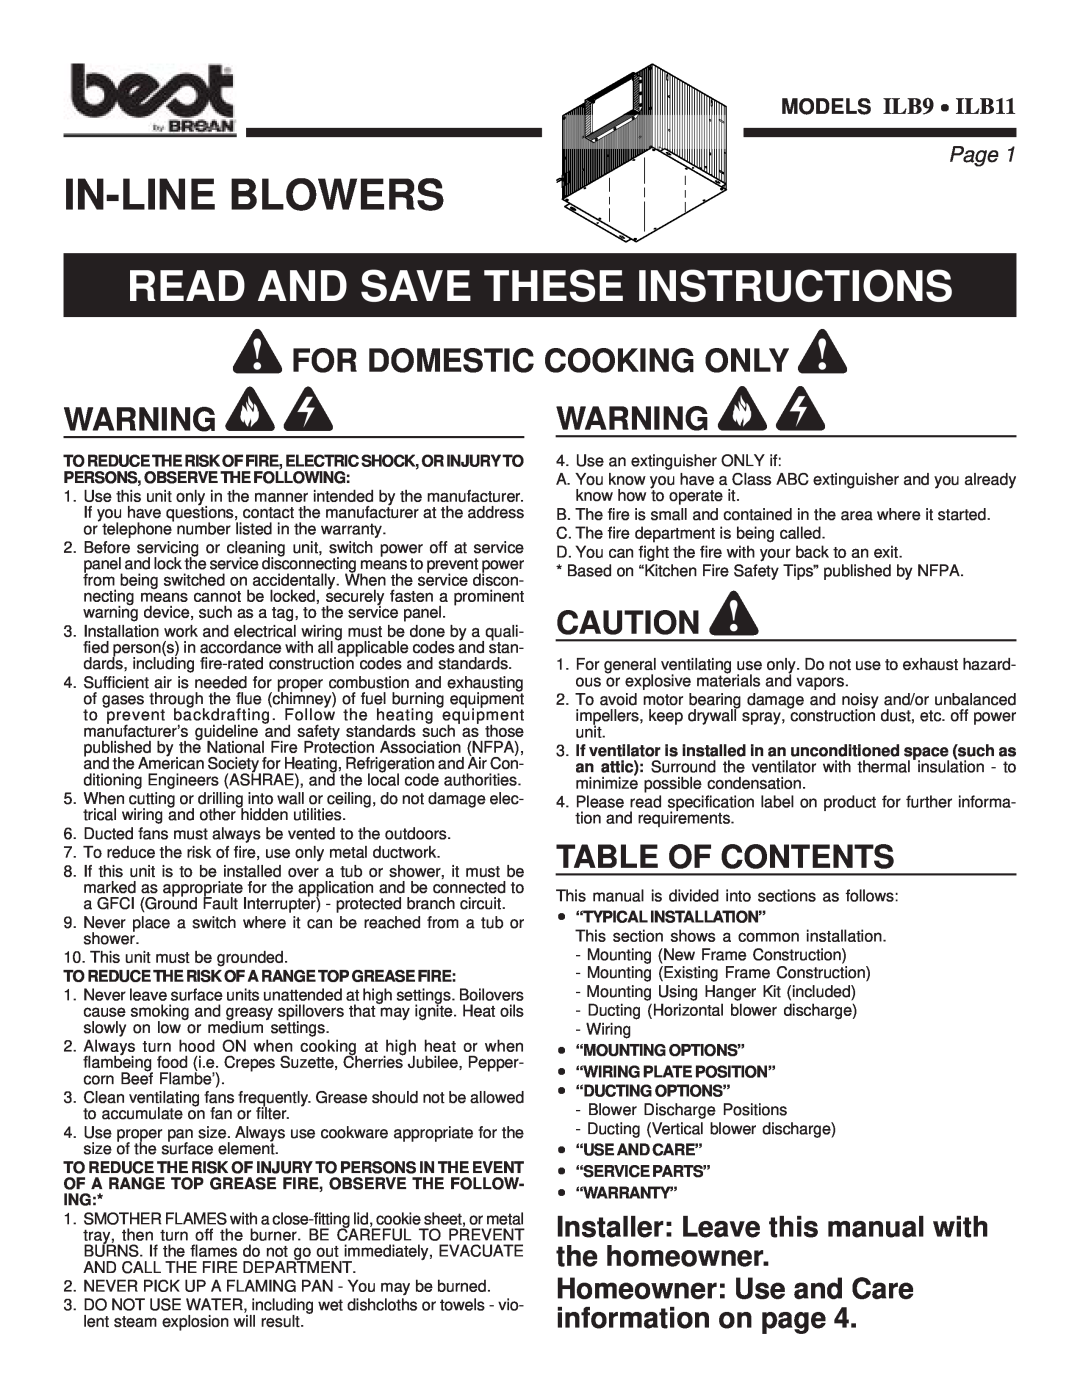 Best ILB9, ILB11 warranty For Domestic Cooking Only Warning Warning, Table Of Contents, Page, In-Line Blowers 